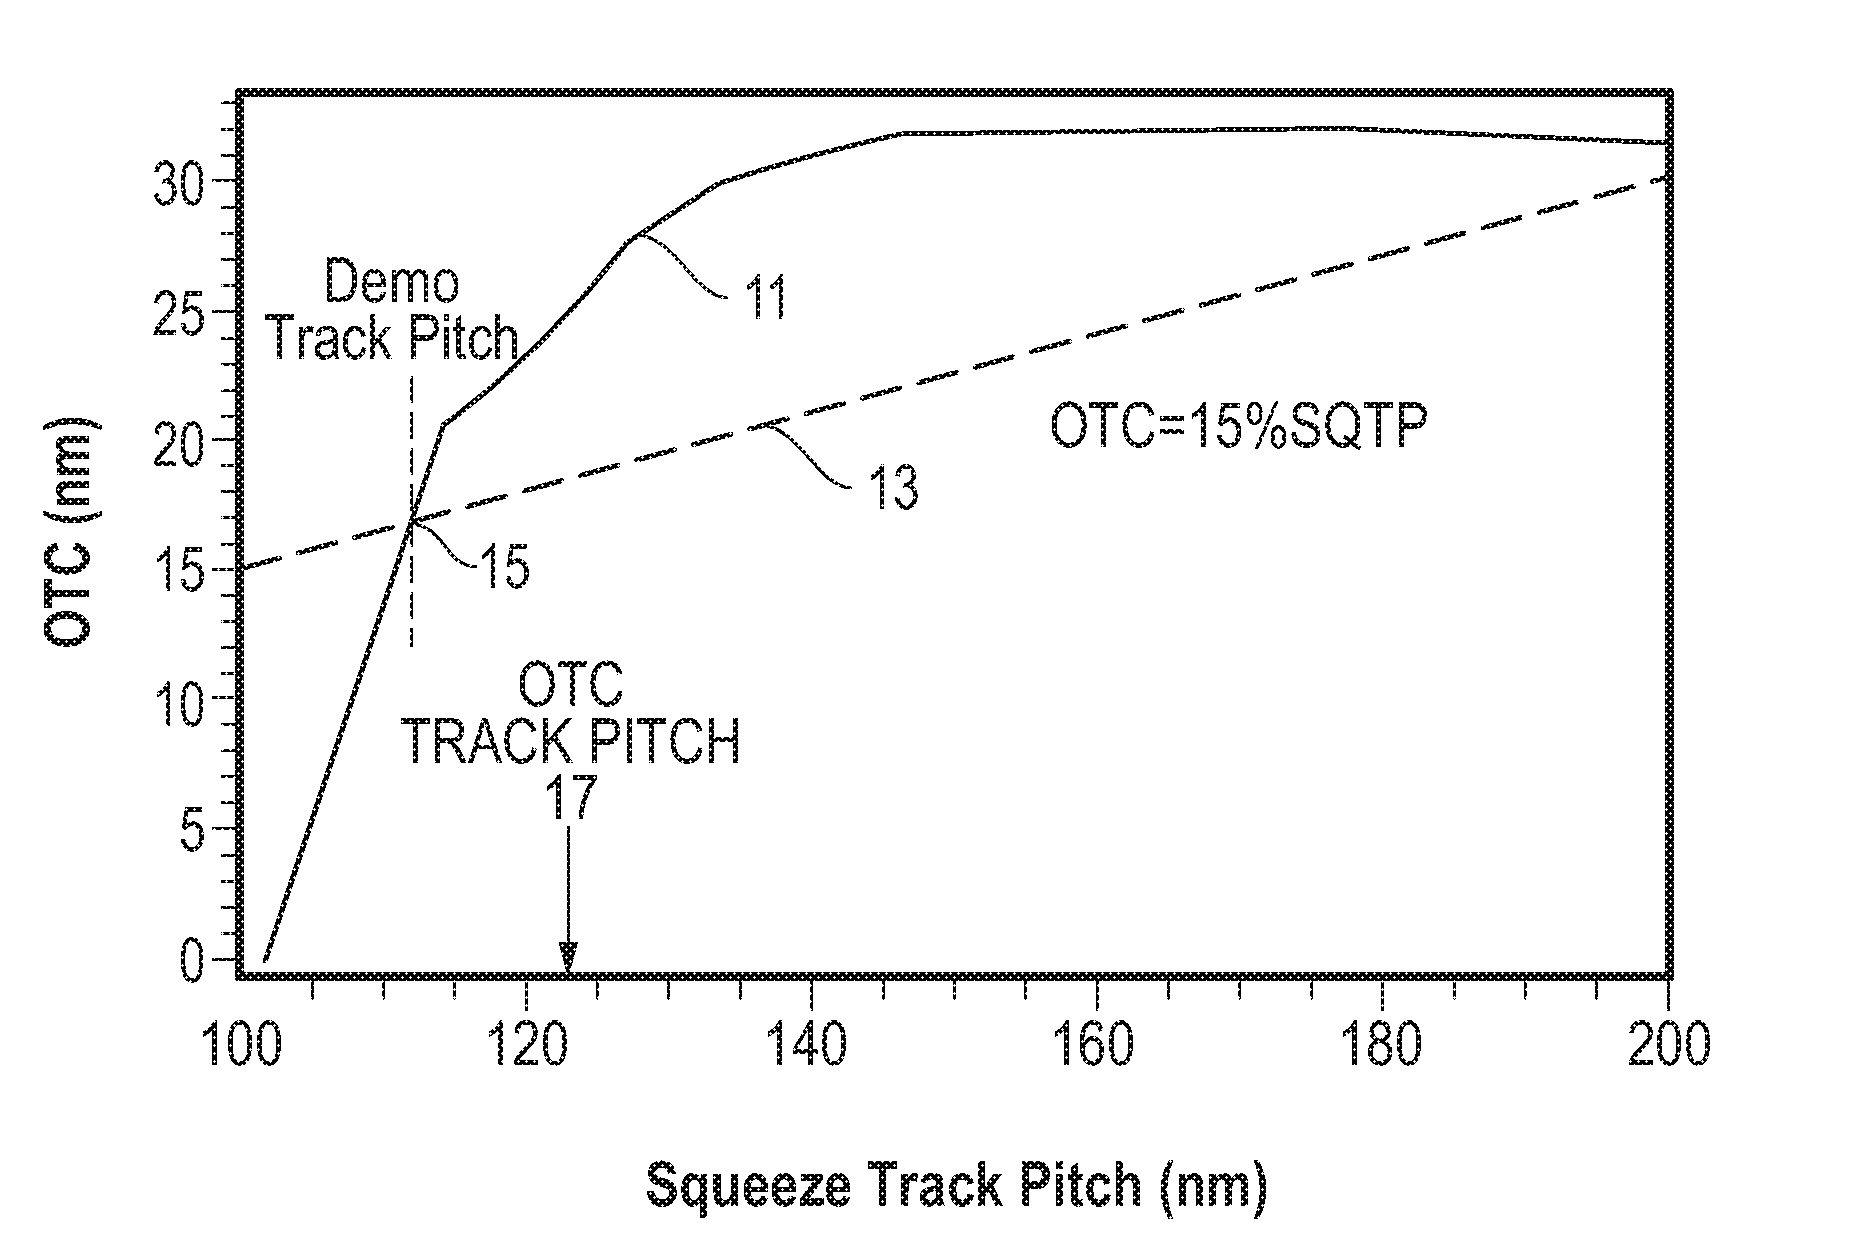 System, method and apparatus for determining track pitch in a hard disk drive to satisfy the requirements of both off-track capacity and adjacent track erasure